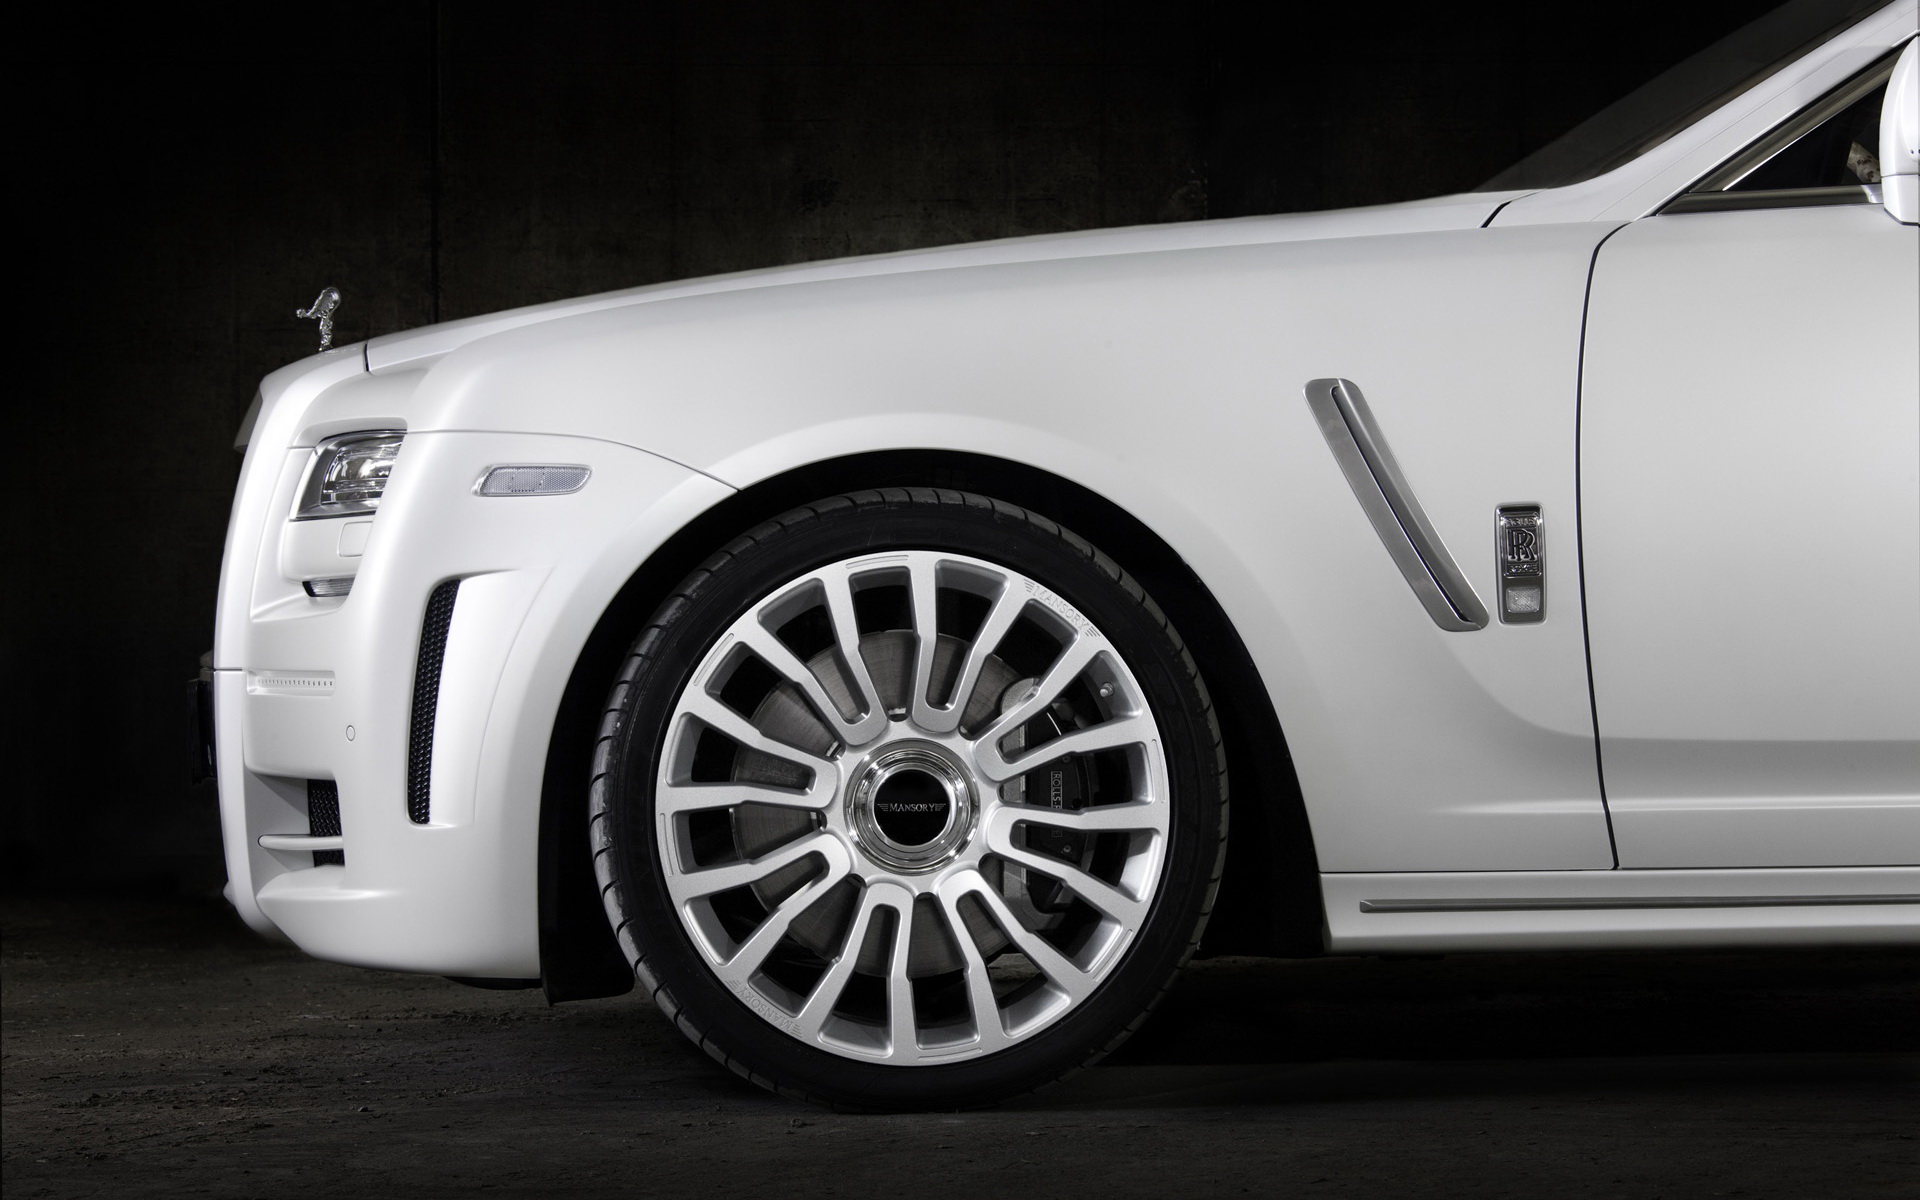 2010 Mansory Rolls-Royce(˹˹) White Ghost Limited(ֽ9)